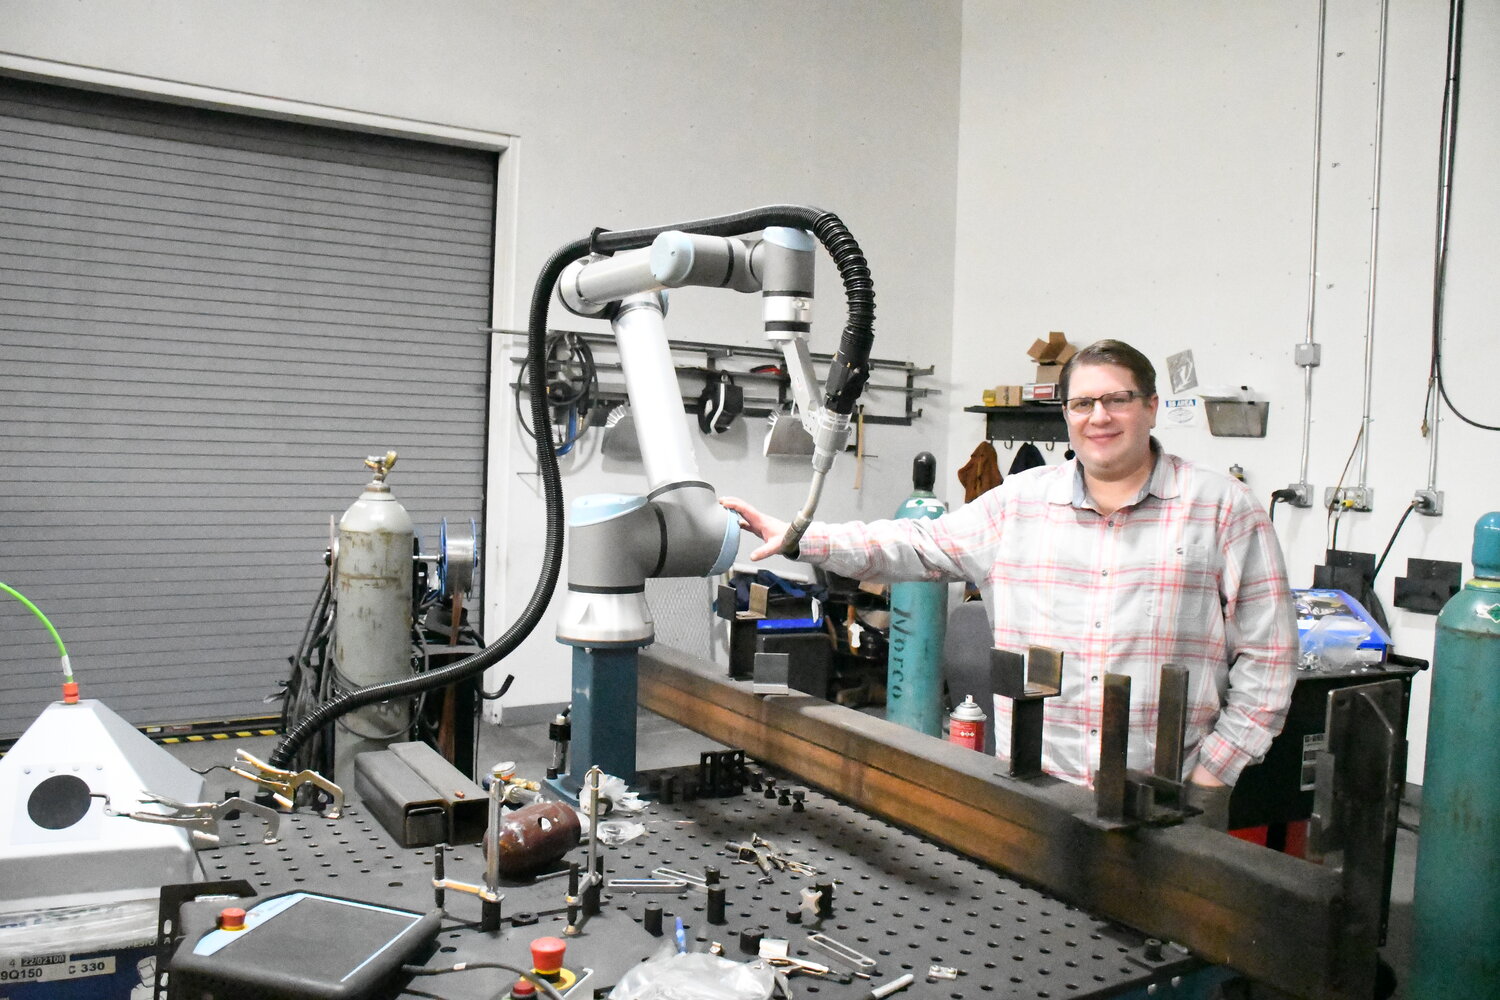 Clean Energy General Manager Sean Columbia poses with his company’s robotic welder.  “We can compete with anyone,” he said, regarding his crew’s stainless steel welding capabilities.